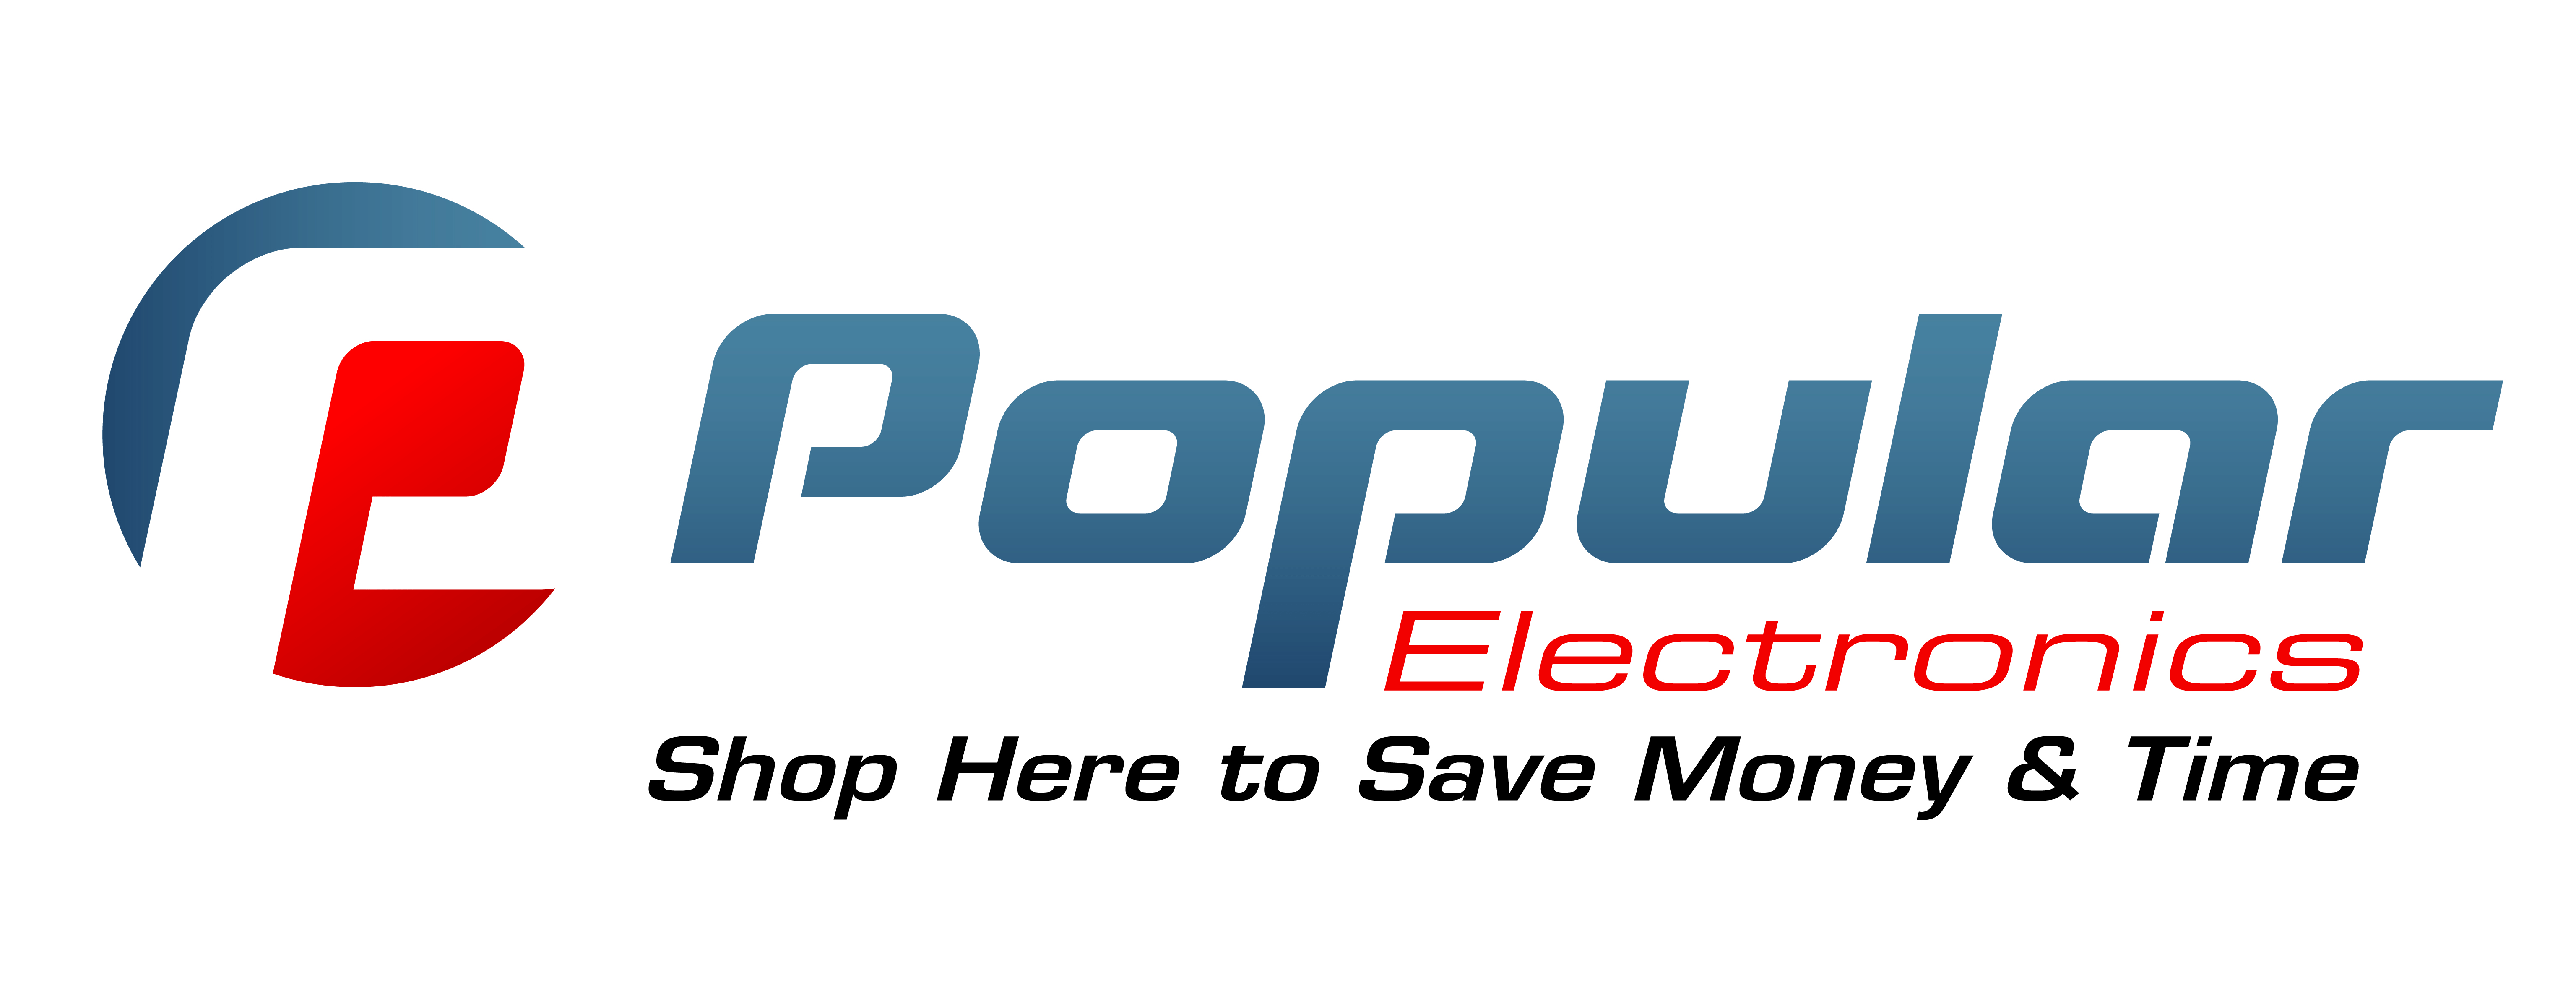 Electronic Store Logo - Products